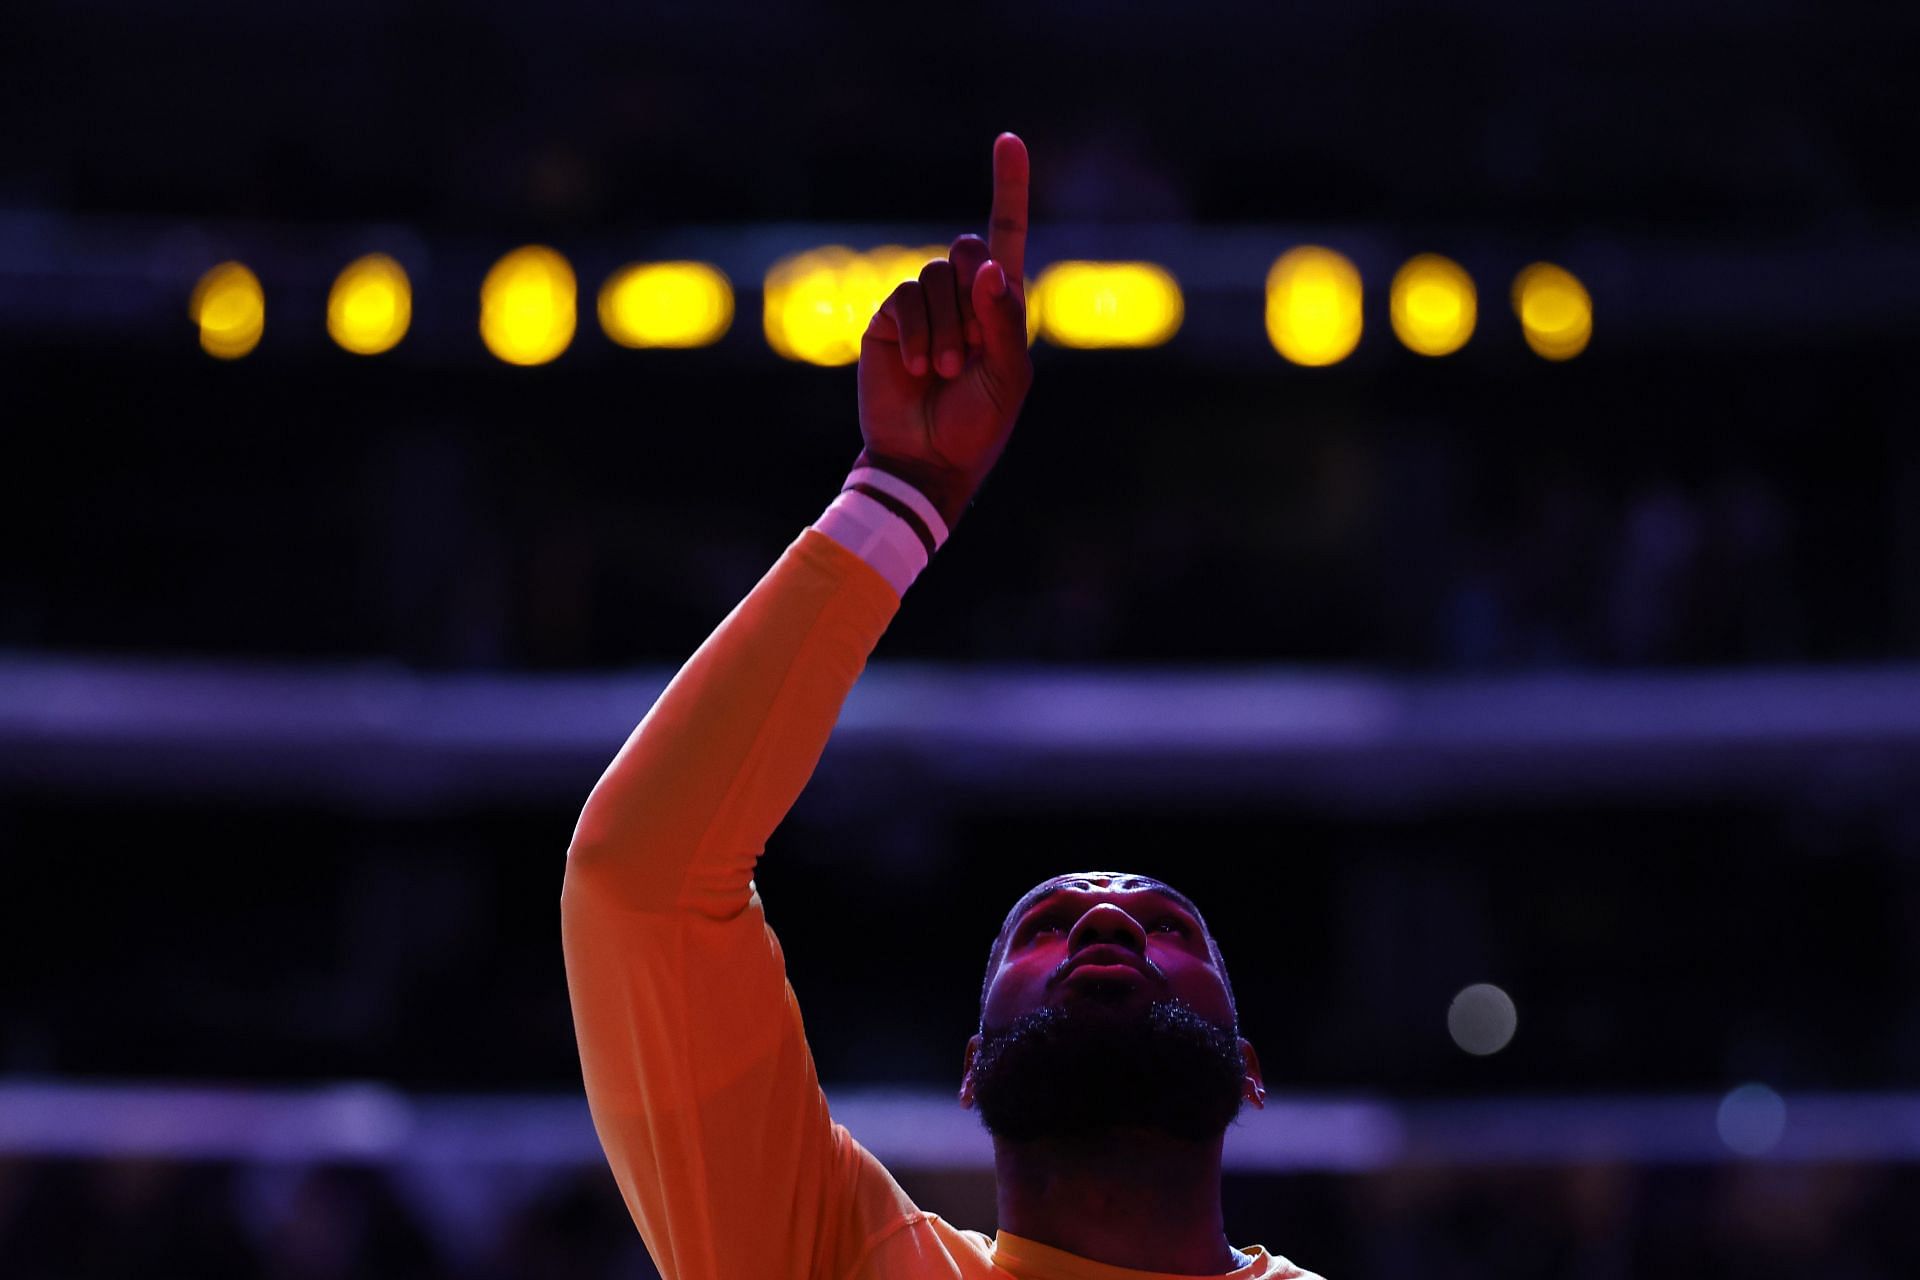 Enter caption Enter caption LeBron James of the LA Lakers reacts during the national anthem before a game against the New Orleans Pelicans on Sunday in Los Angeles, California.